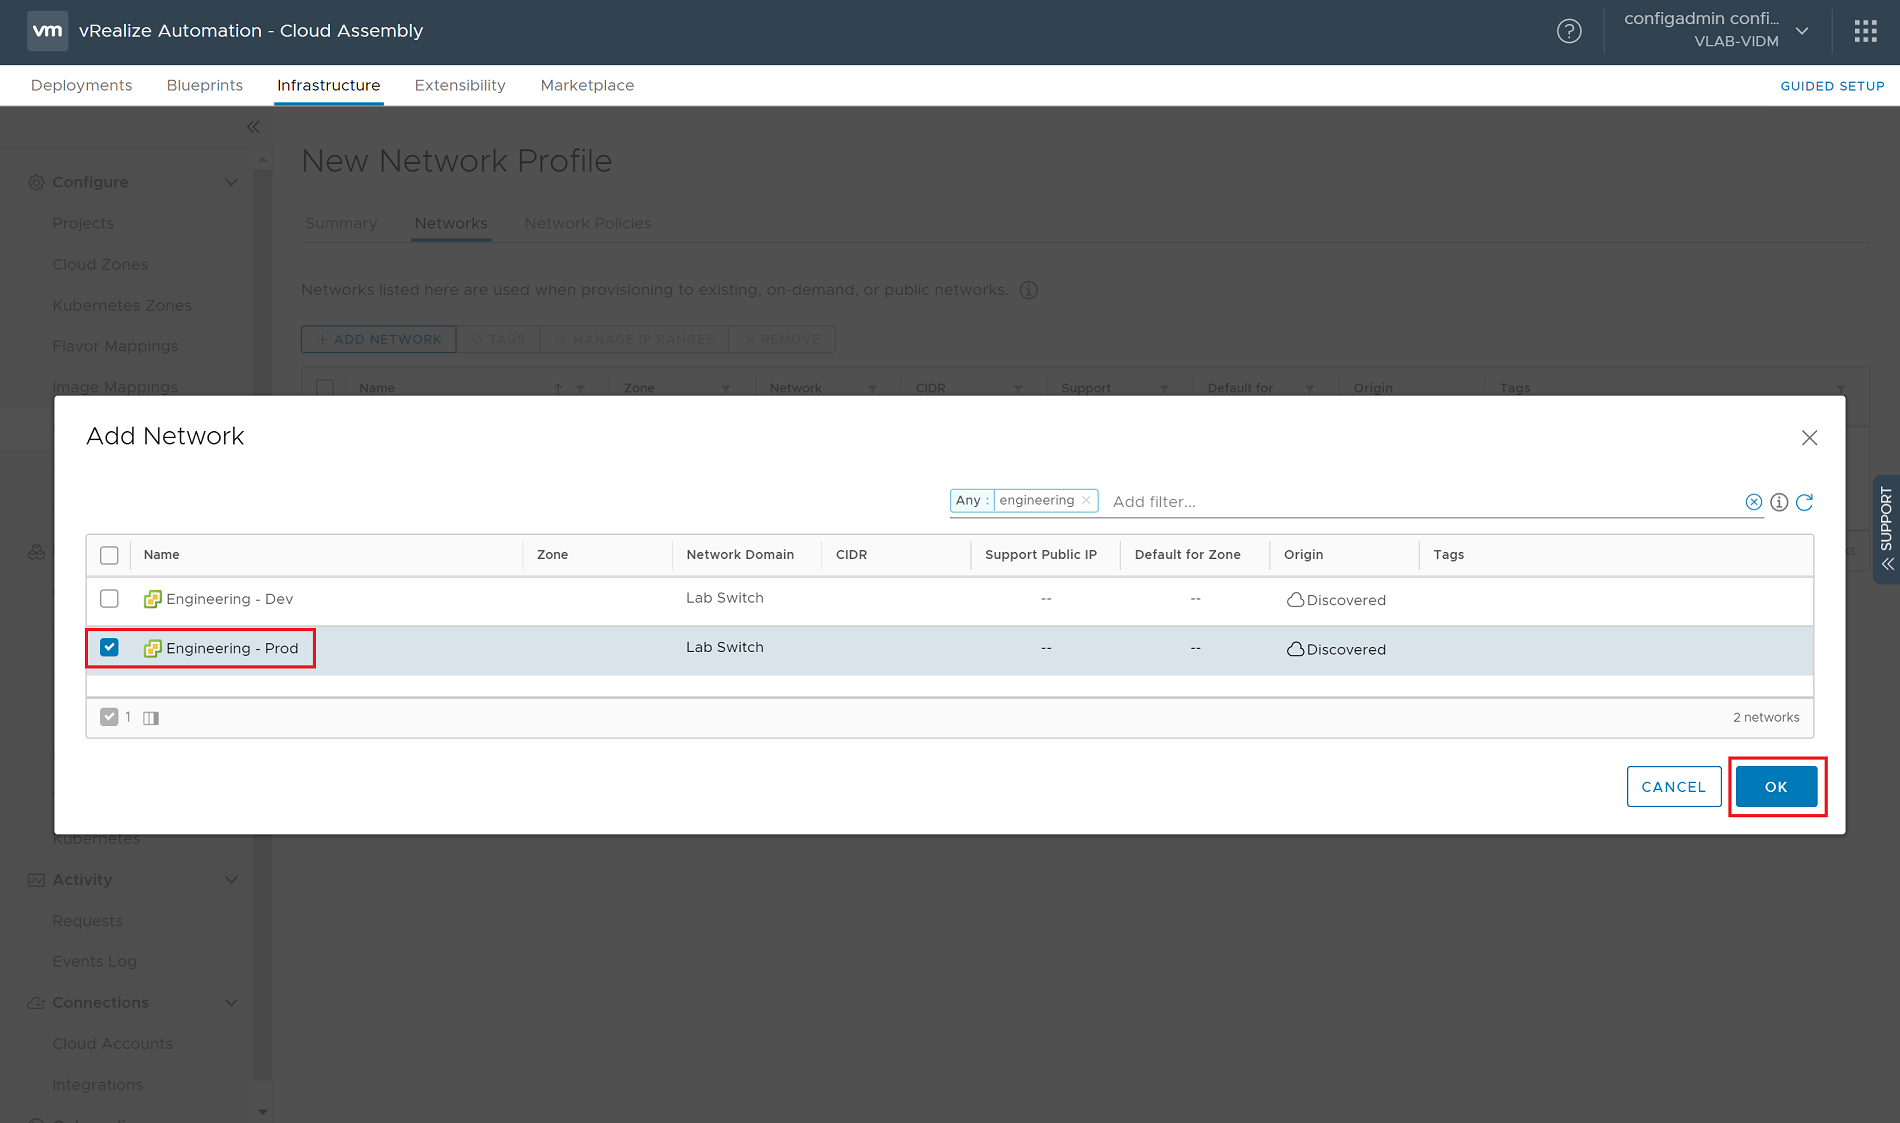 vRealize Automation 8.0 - Cloud Assembly - Infrastructure - Network Profiles - New Network Profile - Networks Tab - Add Network Dialog